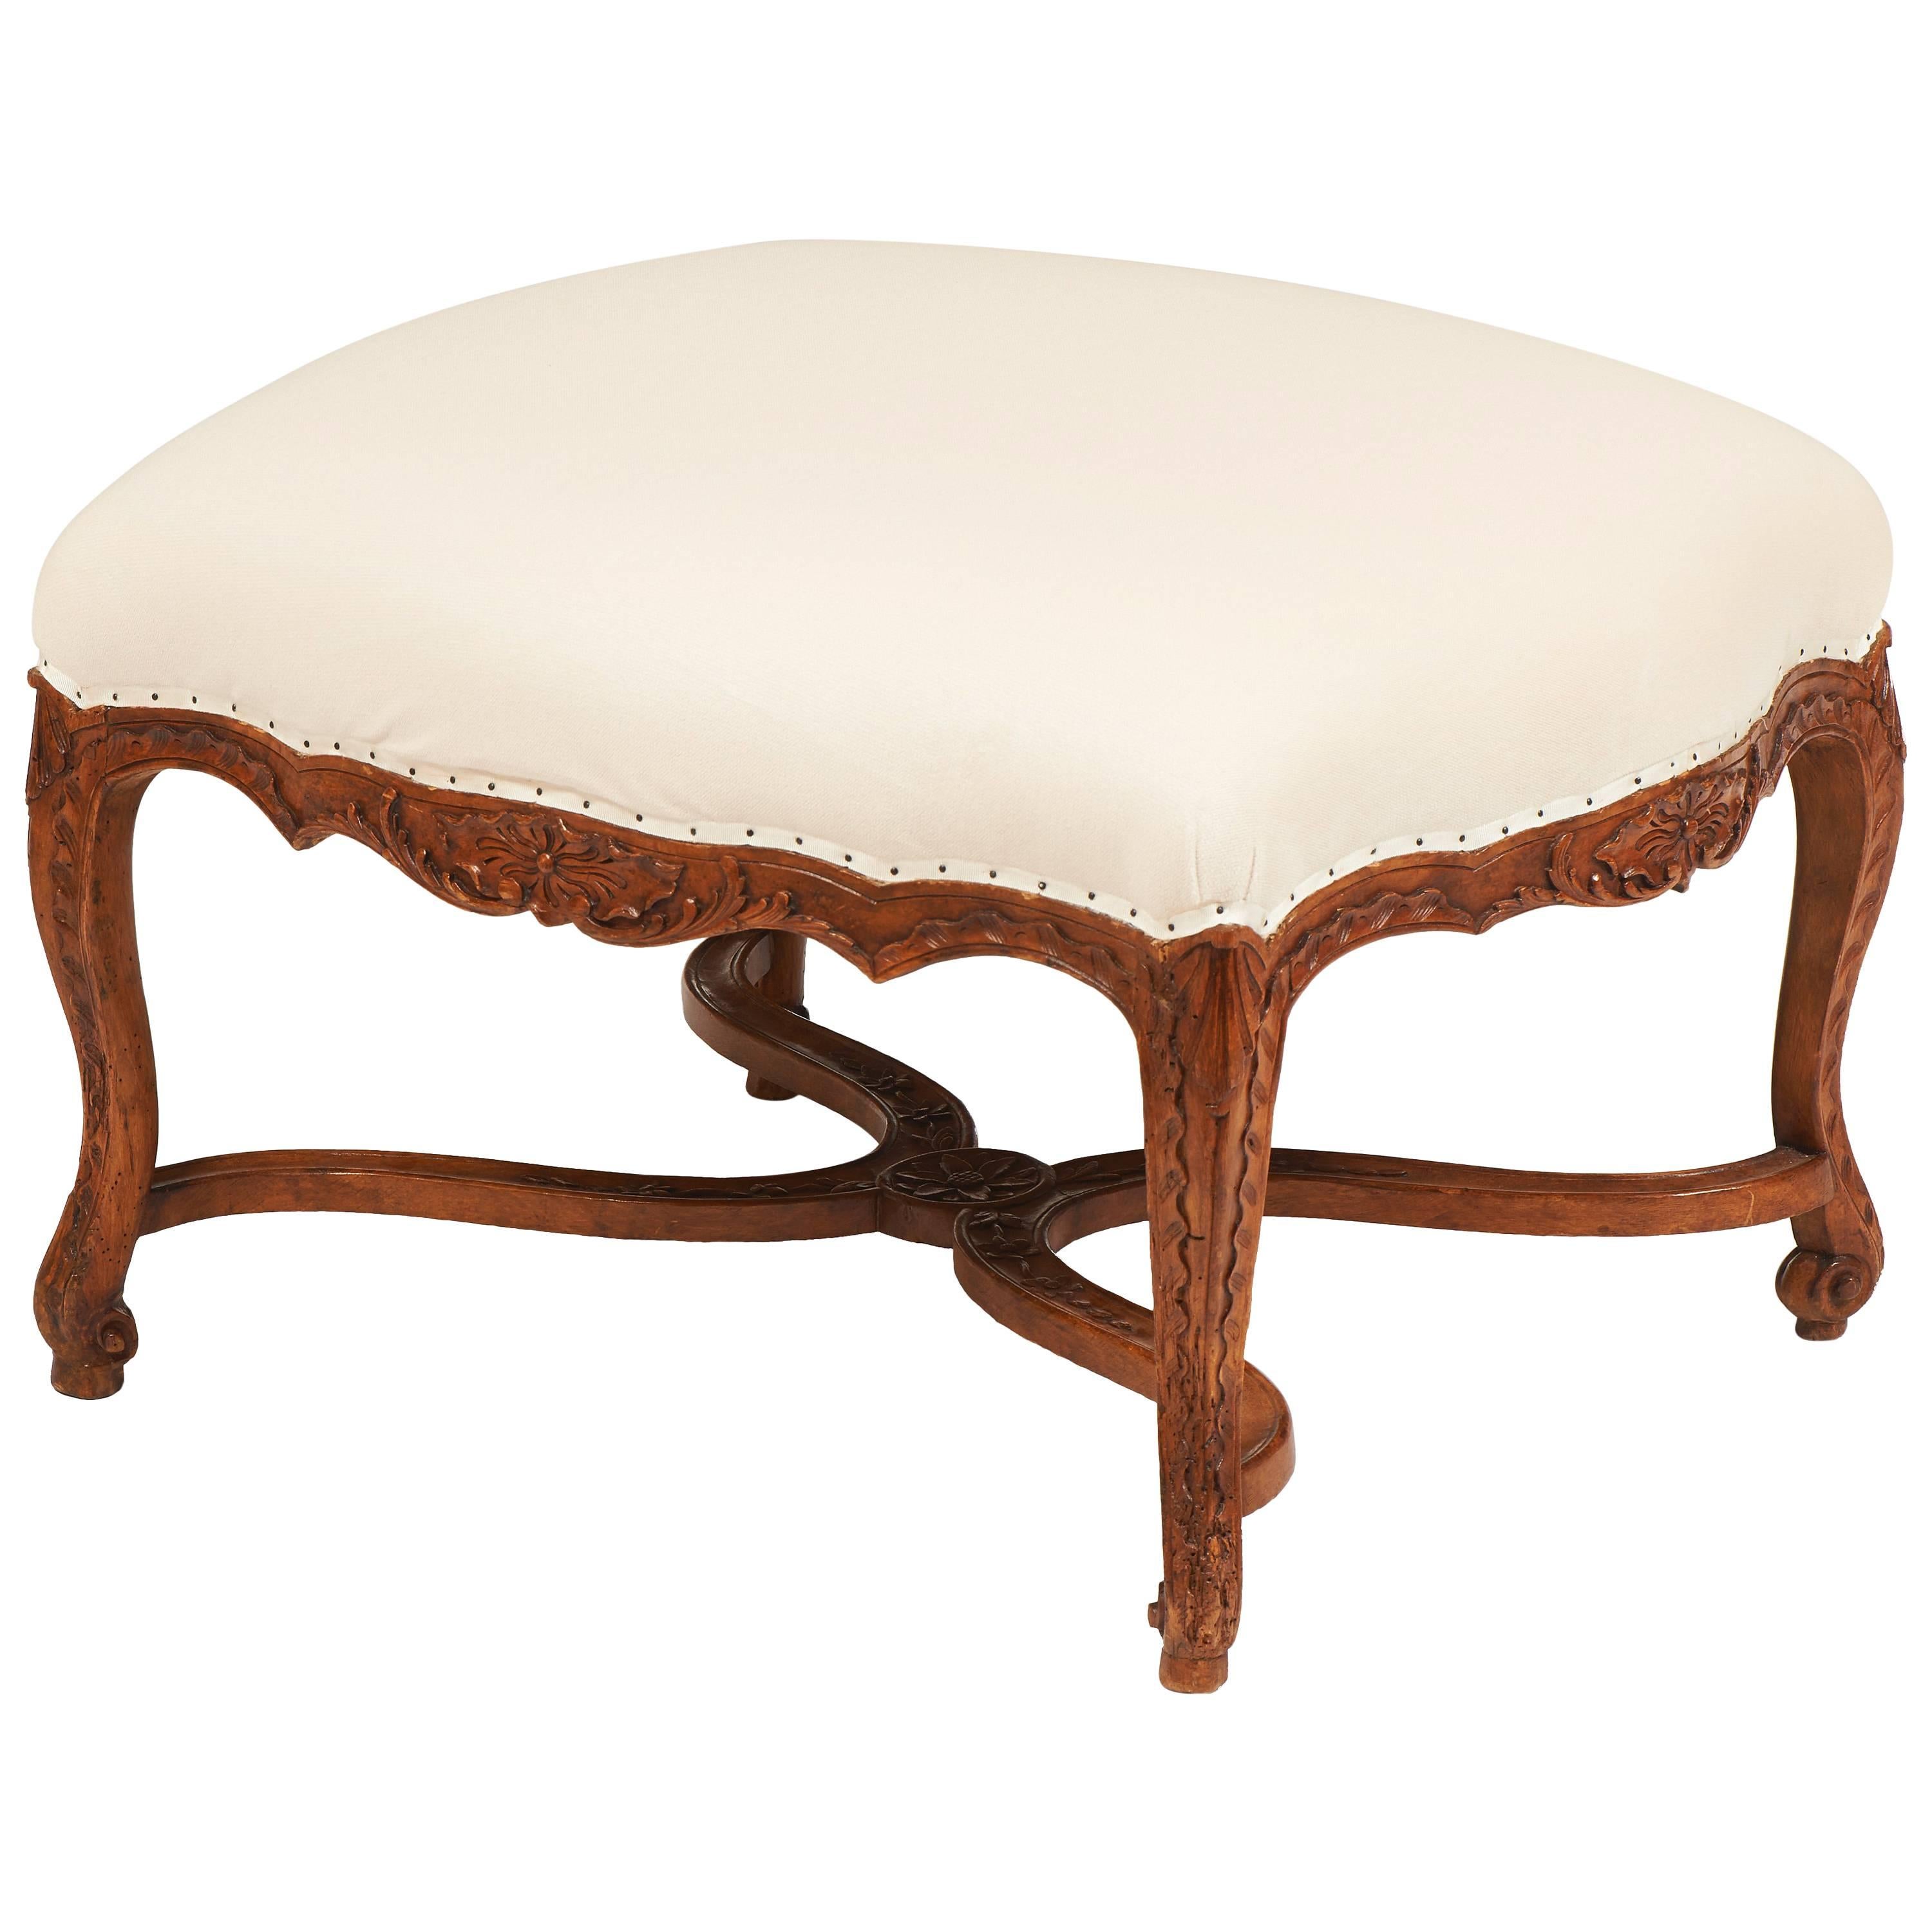 Louis XV Walnut Carved Stool from 18th Century Decorated with Foliage Motifs For Sale